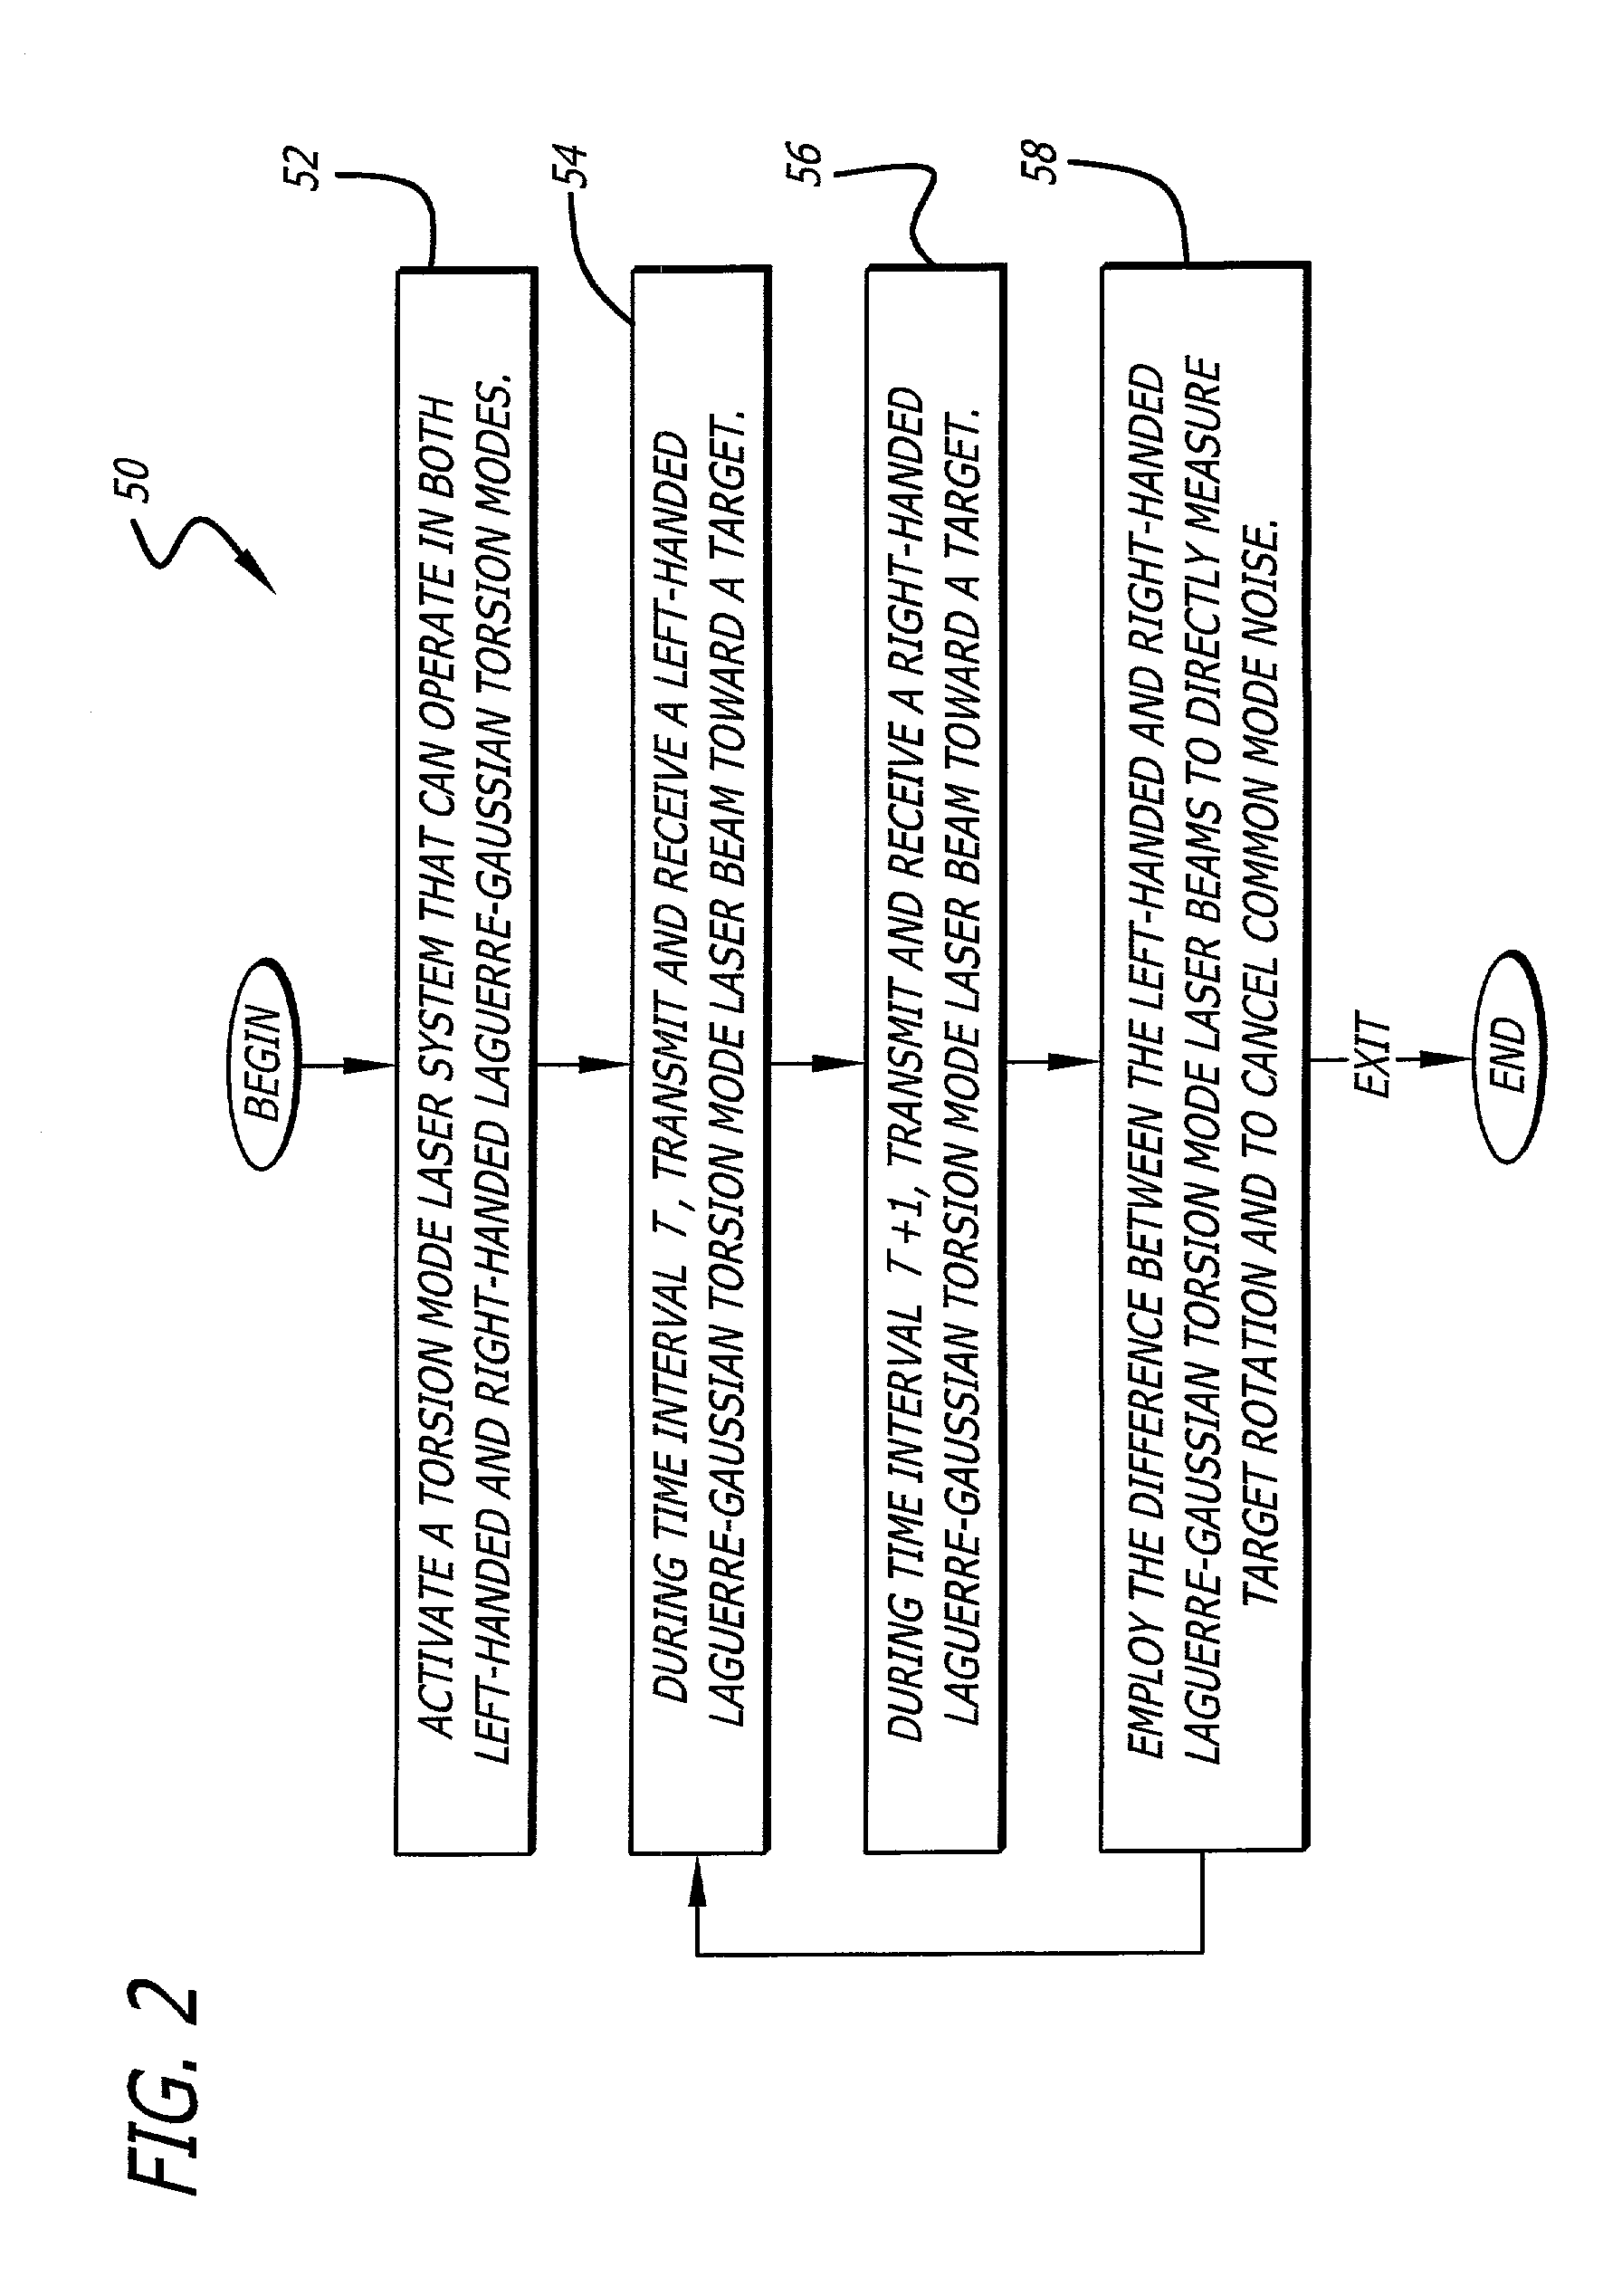 Efficient system and method for measuring target characteristics via a beam of electromagnetic energy